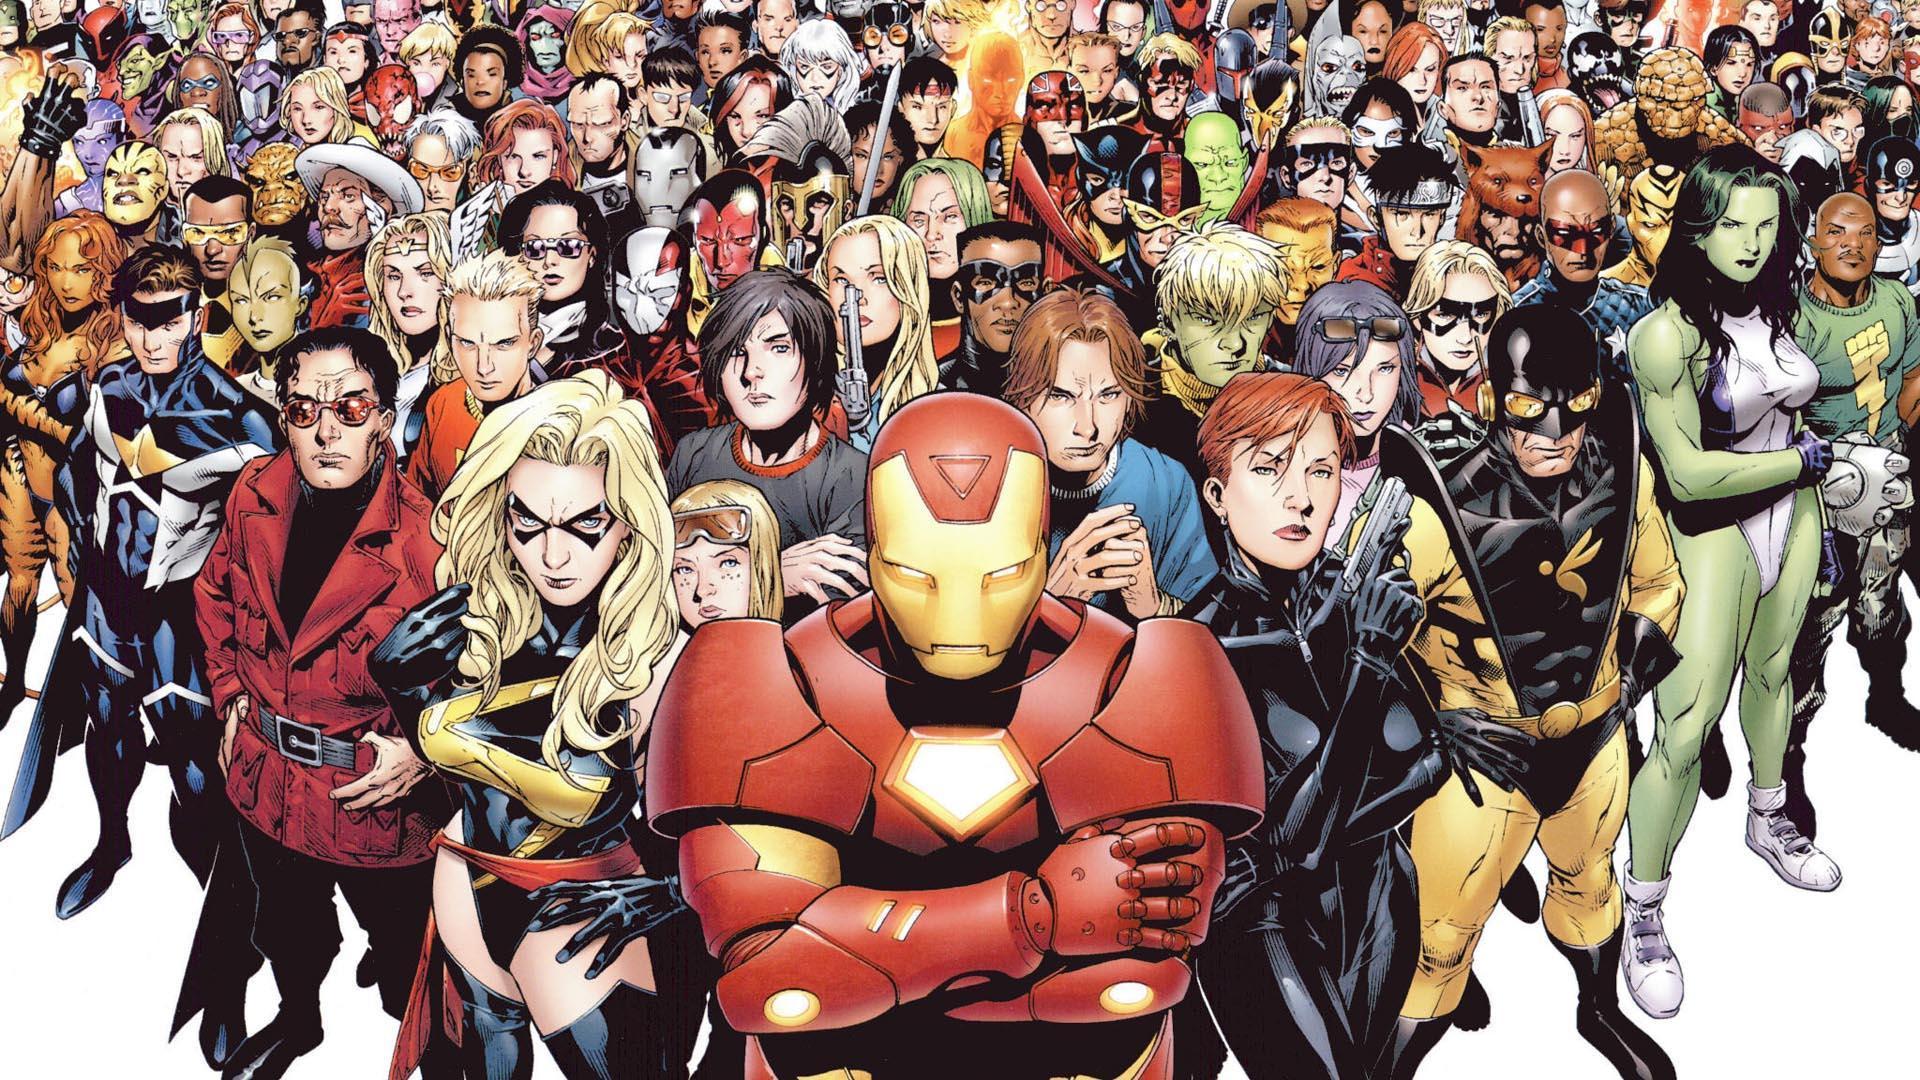 Marvel Universe Wallpapers 1920X1080 32113 Hd Wallpapers in Movies